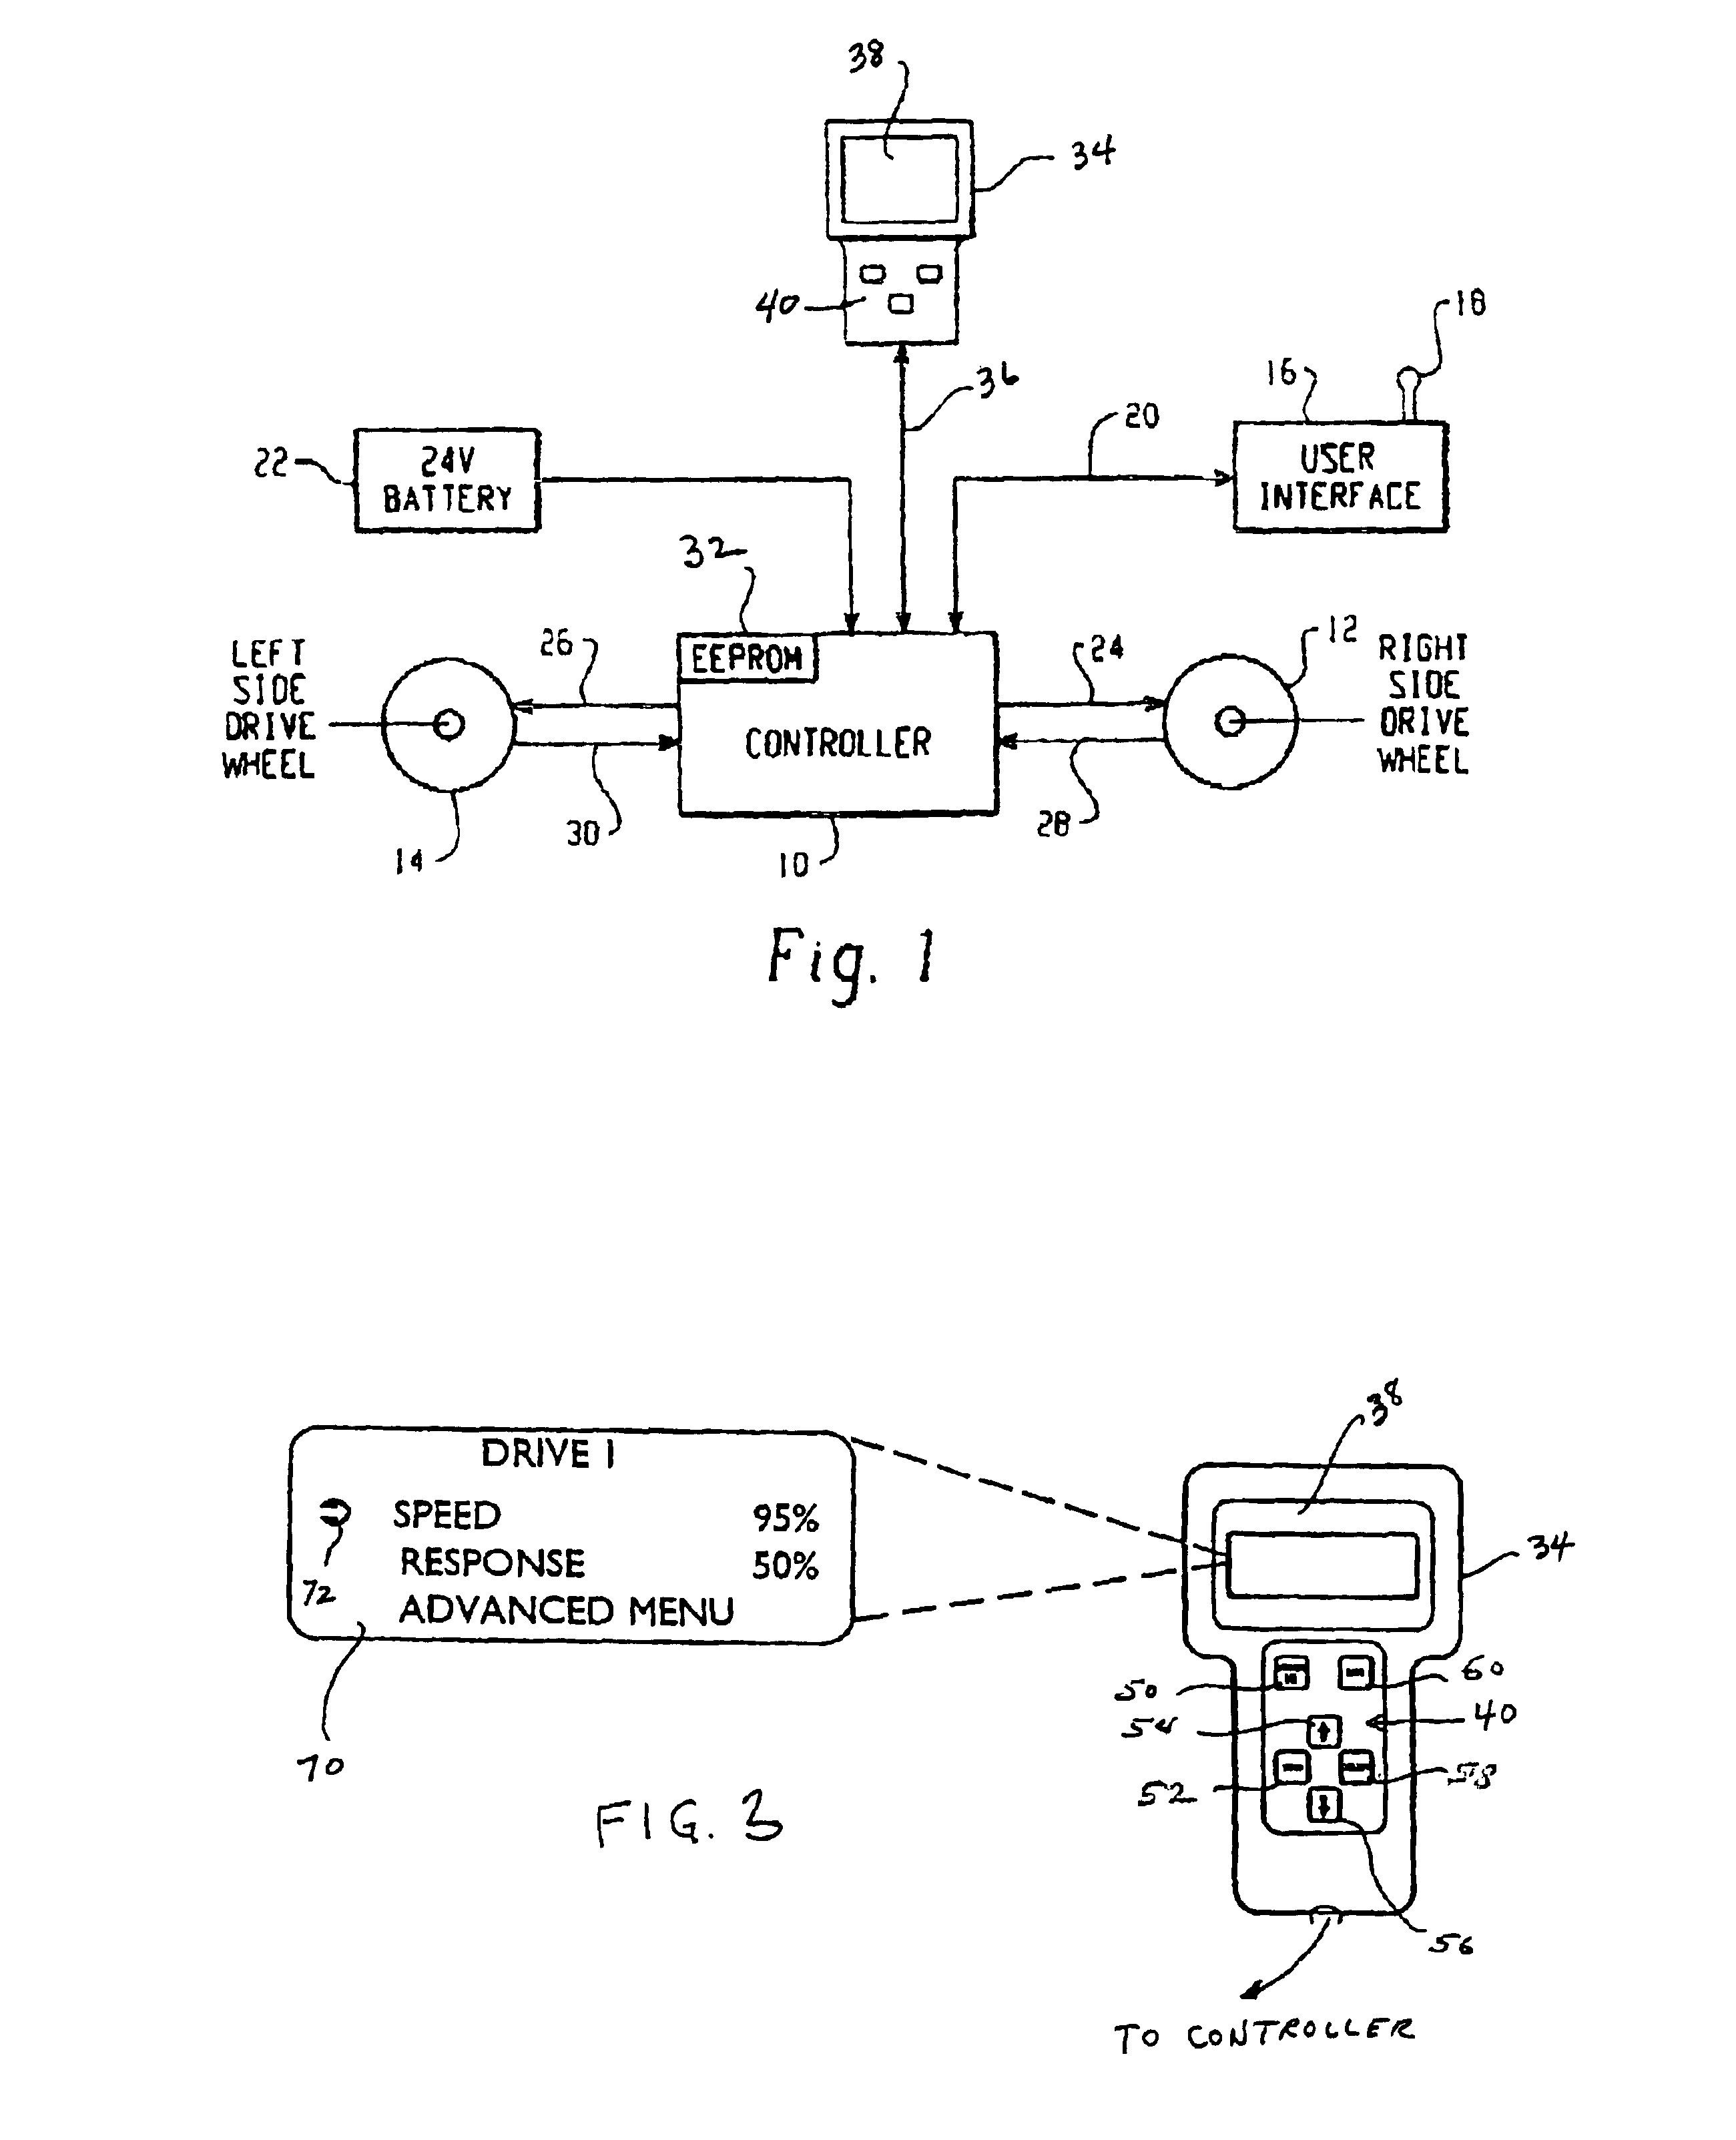 Method of adjusting globally performance parameters of a power driven wheelchair